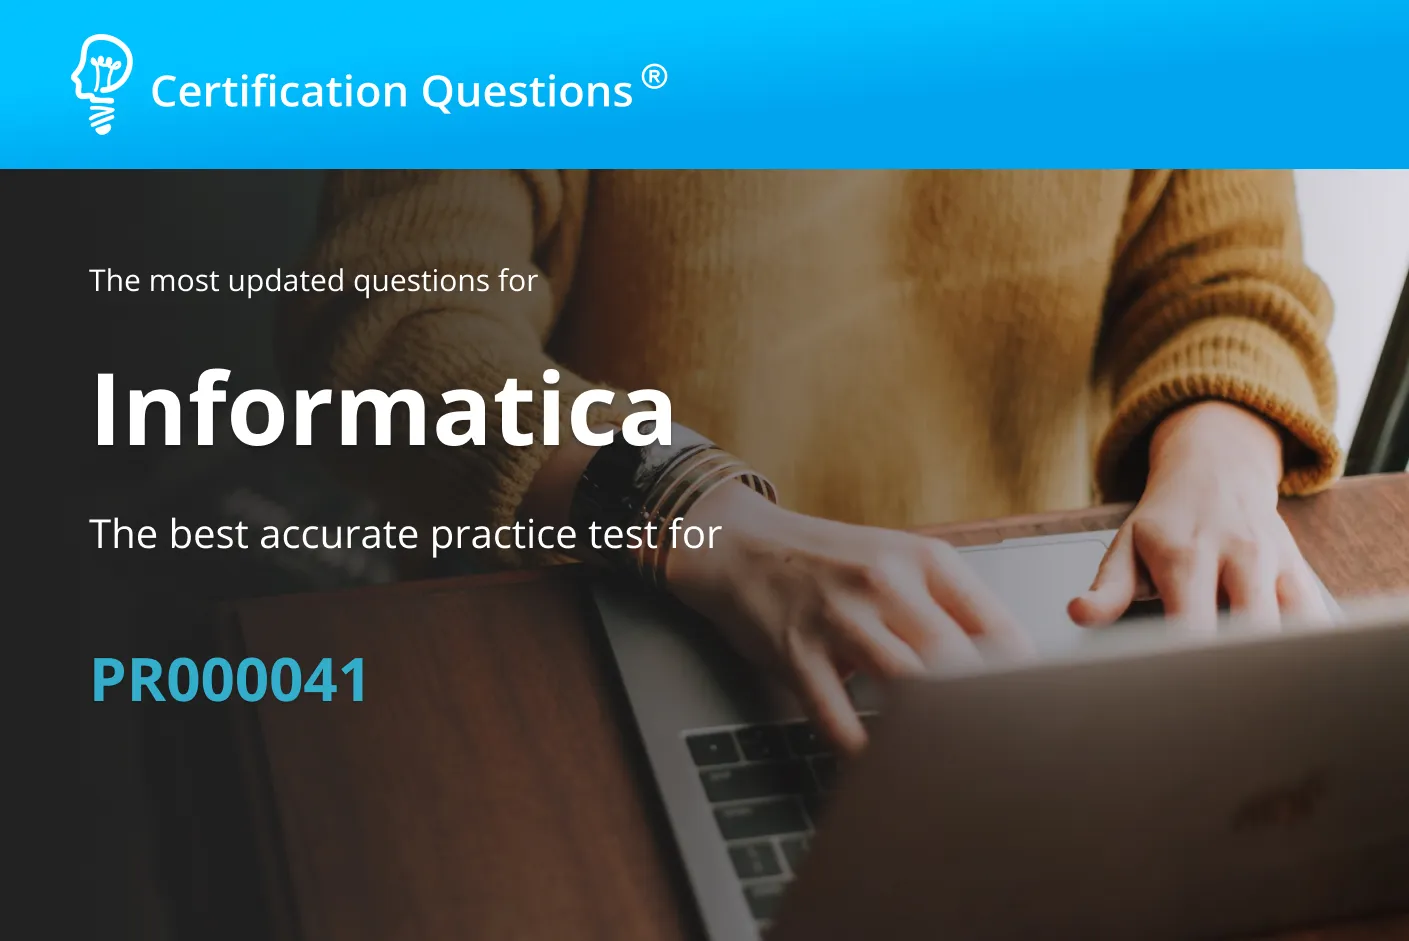 This image is related to Informatica Developer Certification Questions